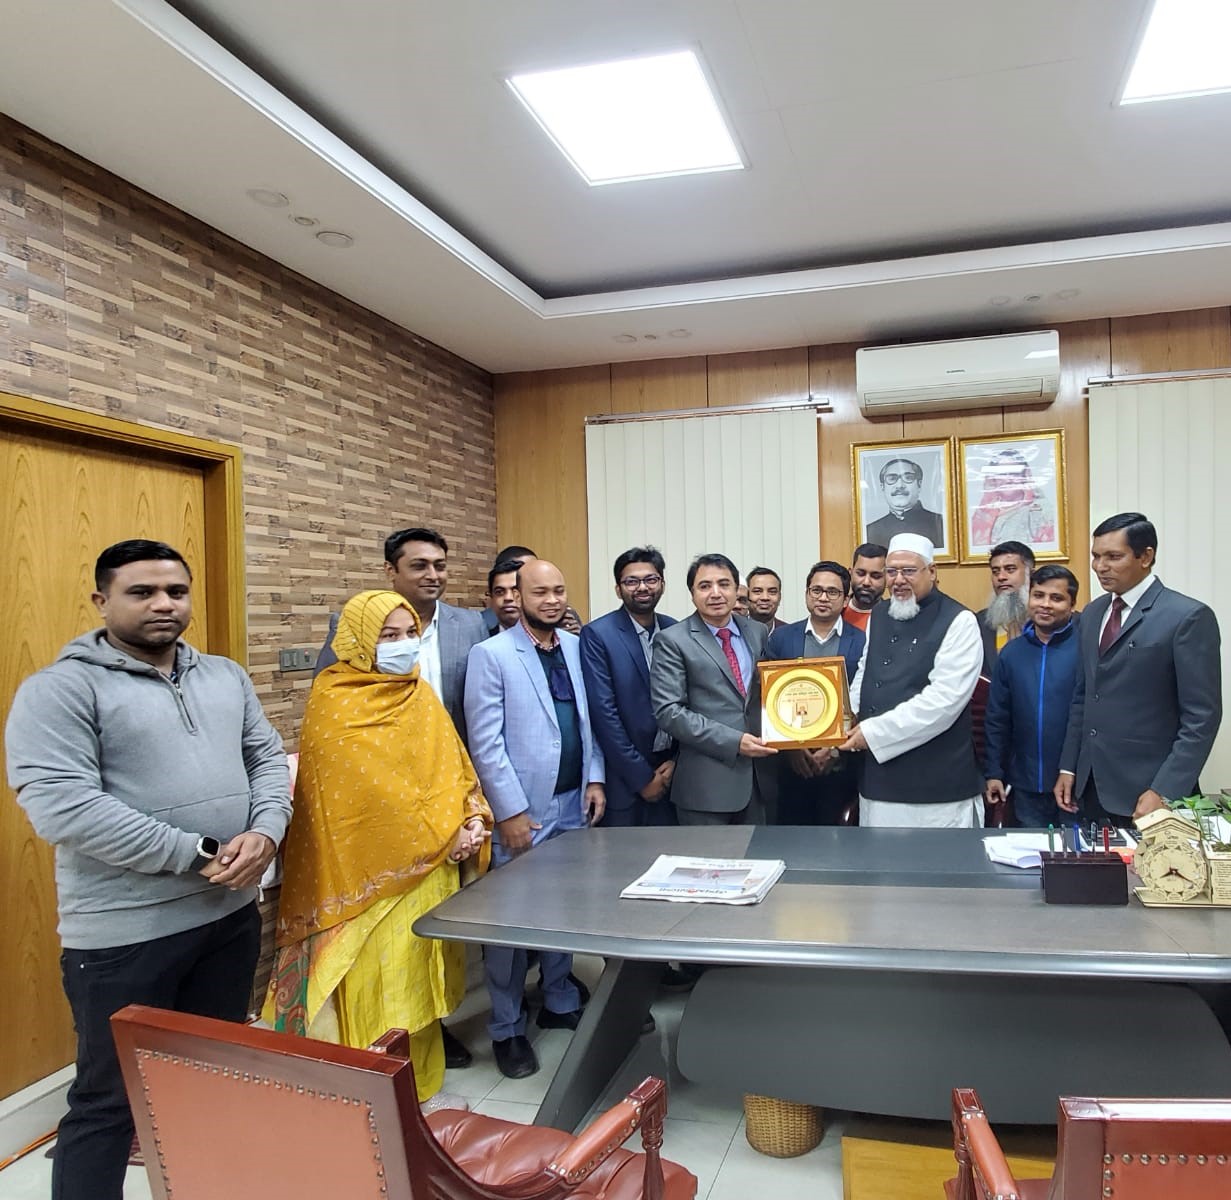 Mr. Md. Golam Rahman, DG of Mission Audit Directorate, has met to congratulate to Md. Faridul Haque Khan MP, the Honorable Minister of Ministry of Religious Affairs